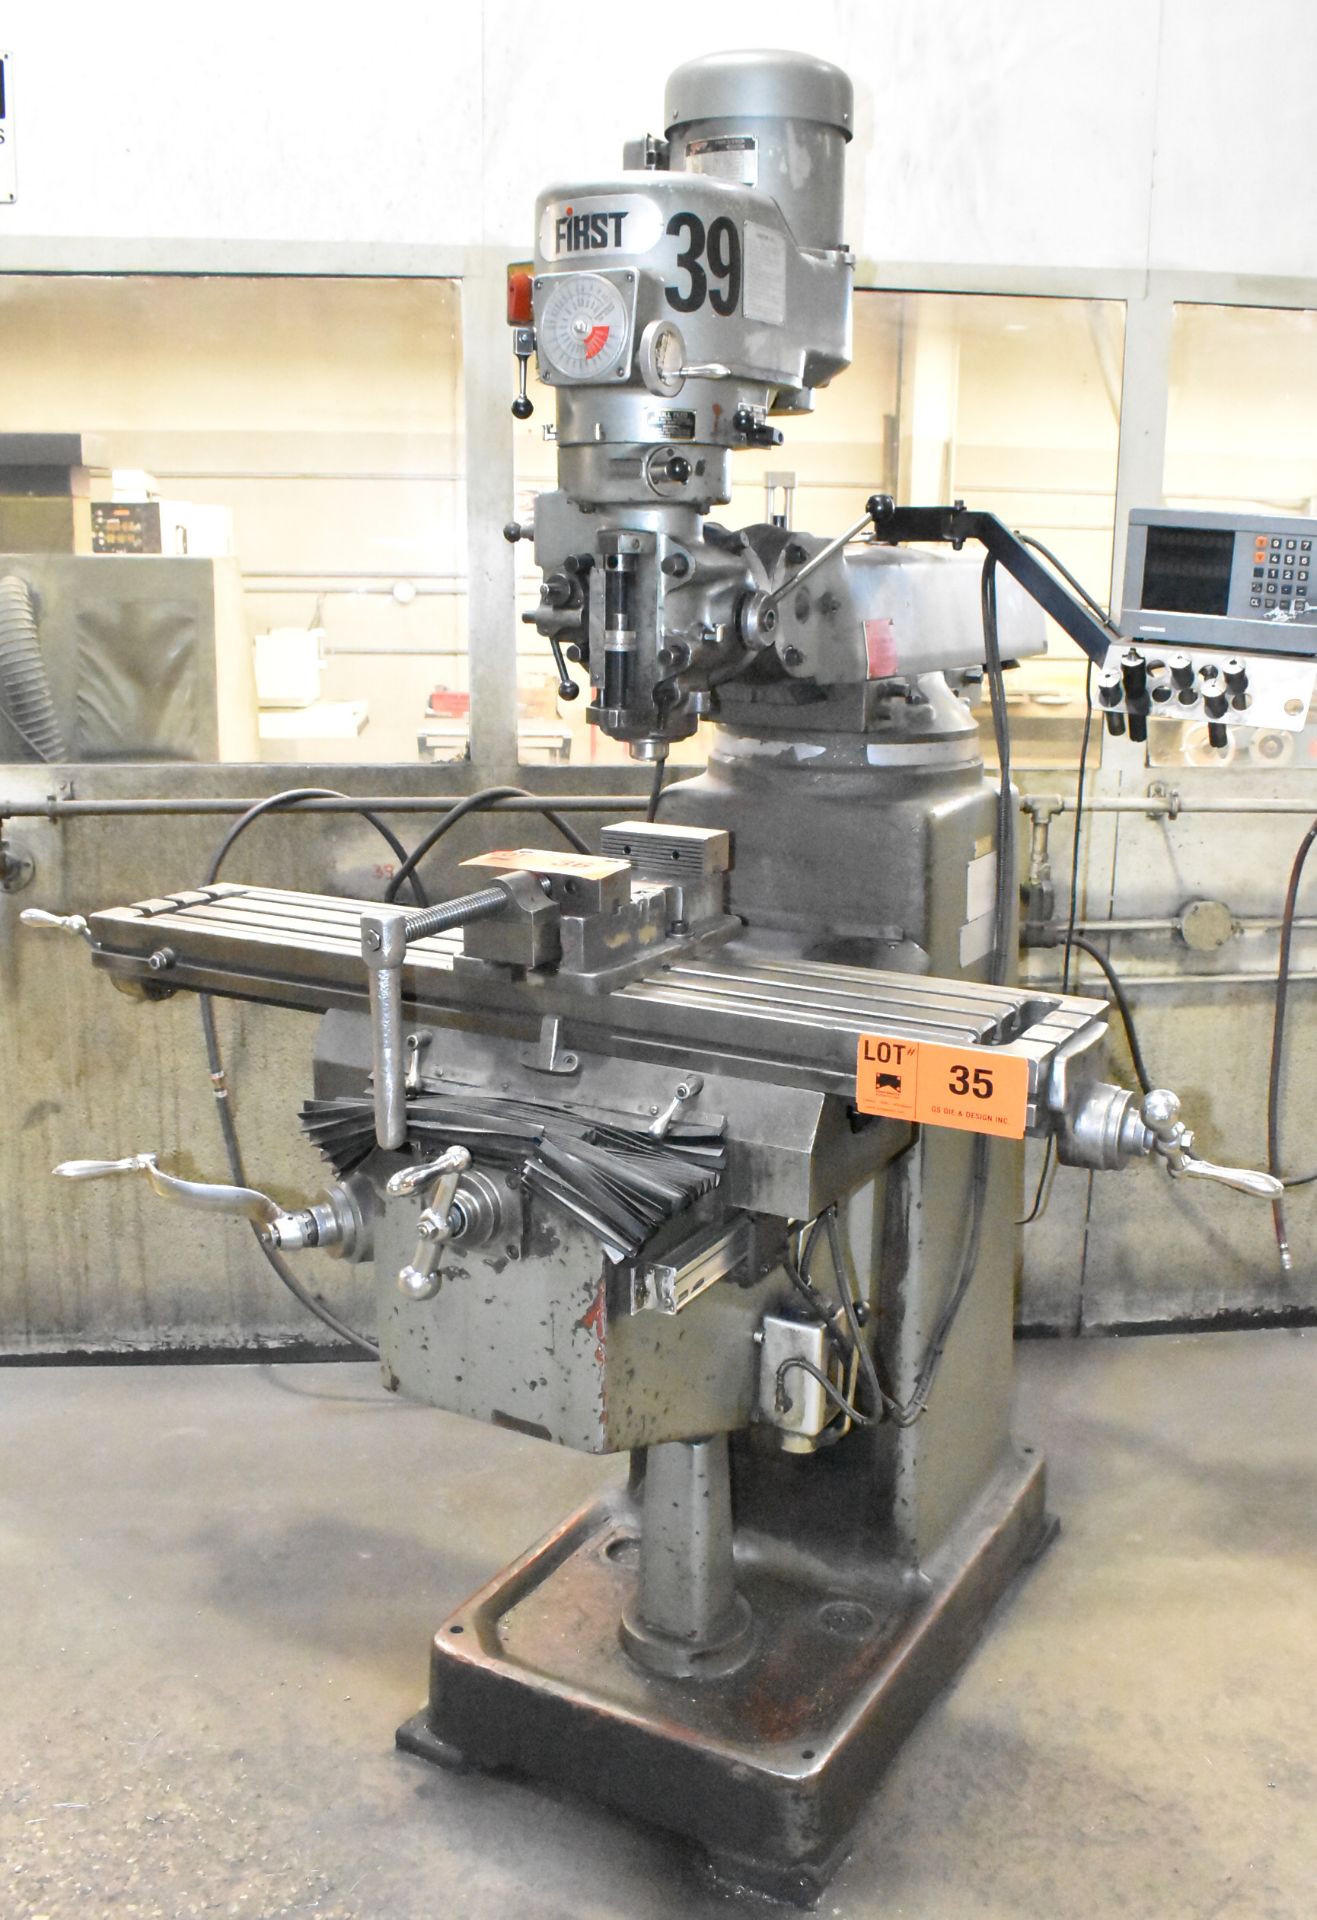 FIRST LC-185VS VERTICAL MILLING MACHINES WITH 50"X10" TABLE, SPEEDS TO 4500 RPM, HEIDENHAIN 2-AXIS